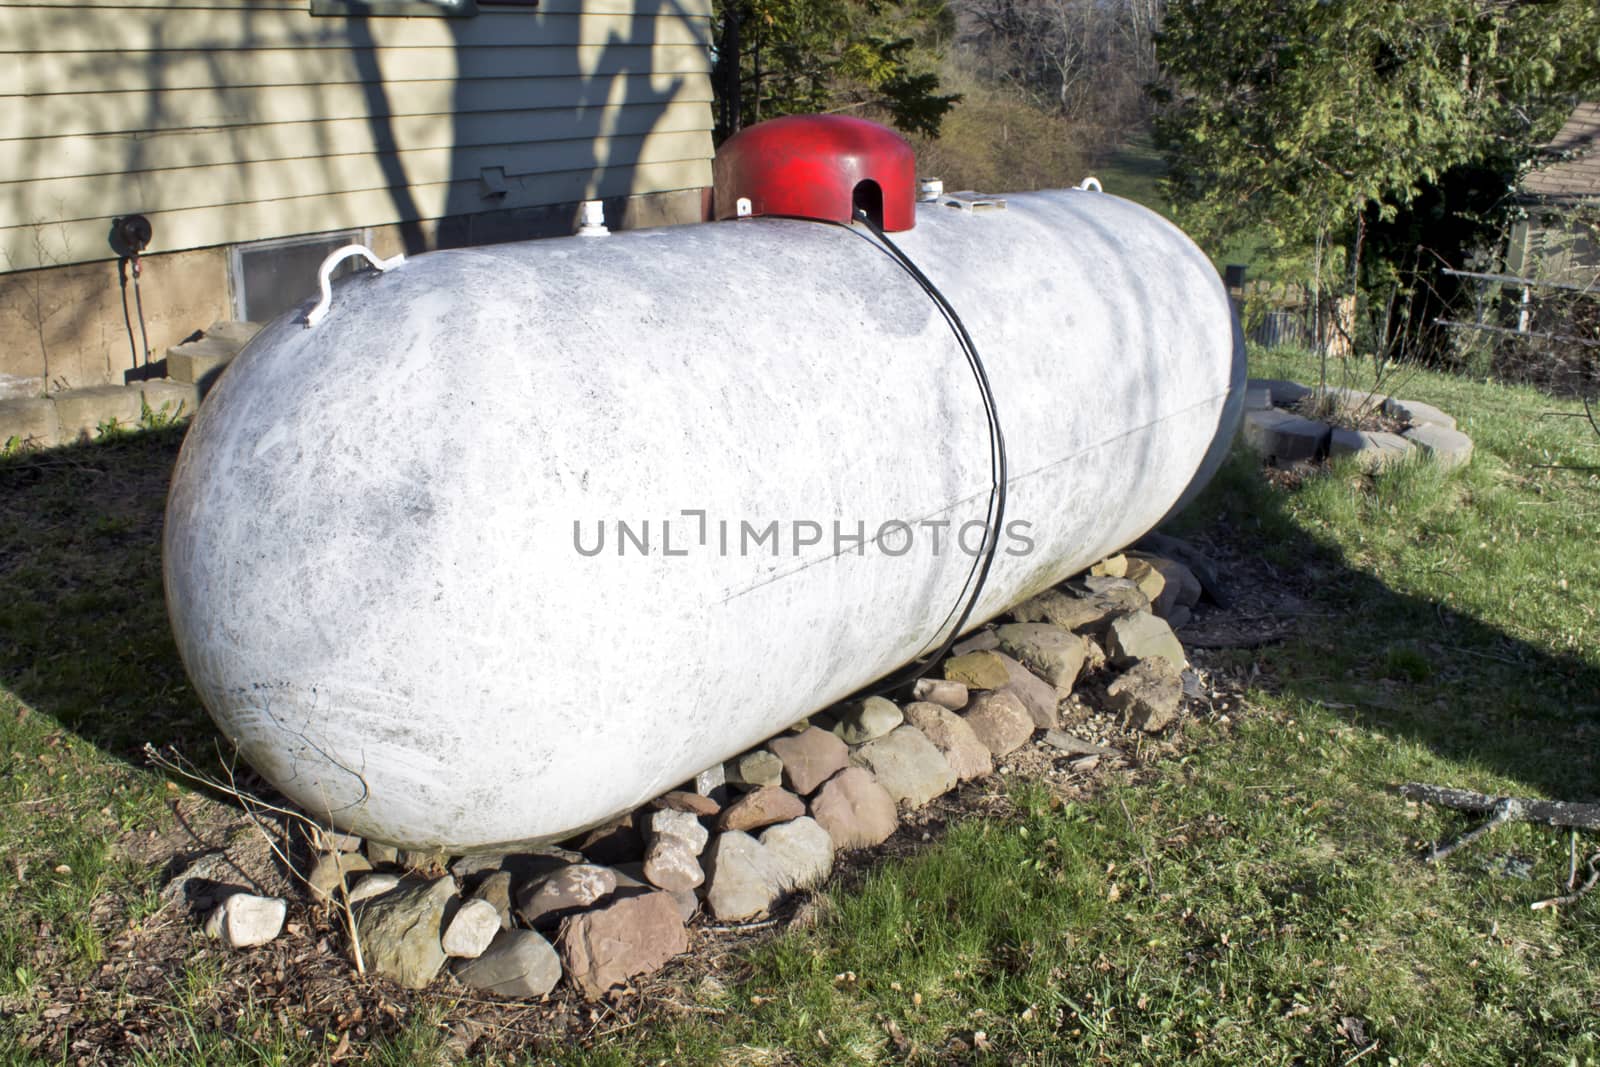 Giant white propane tank on the side of house.